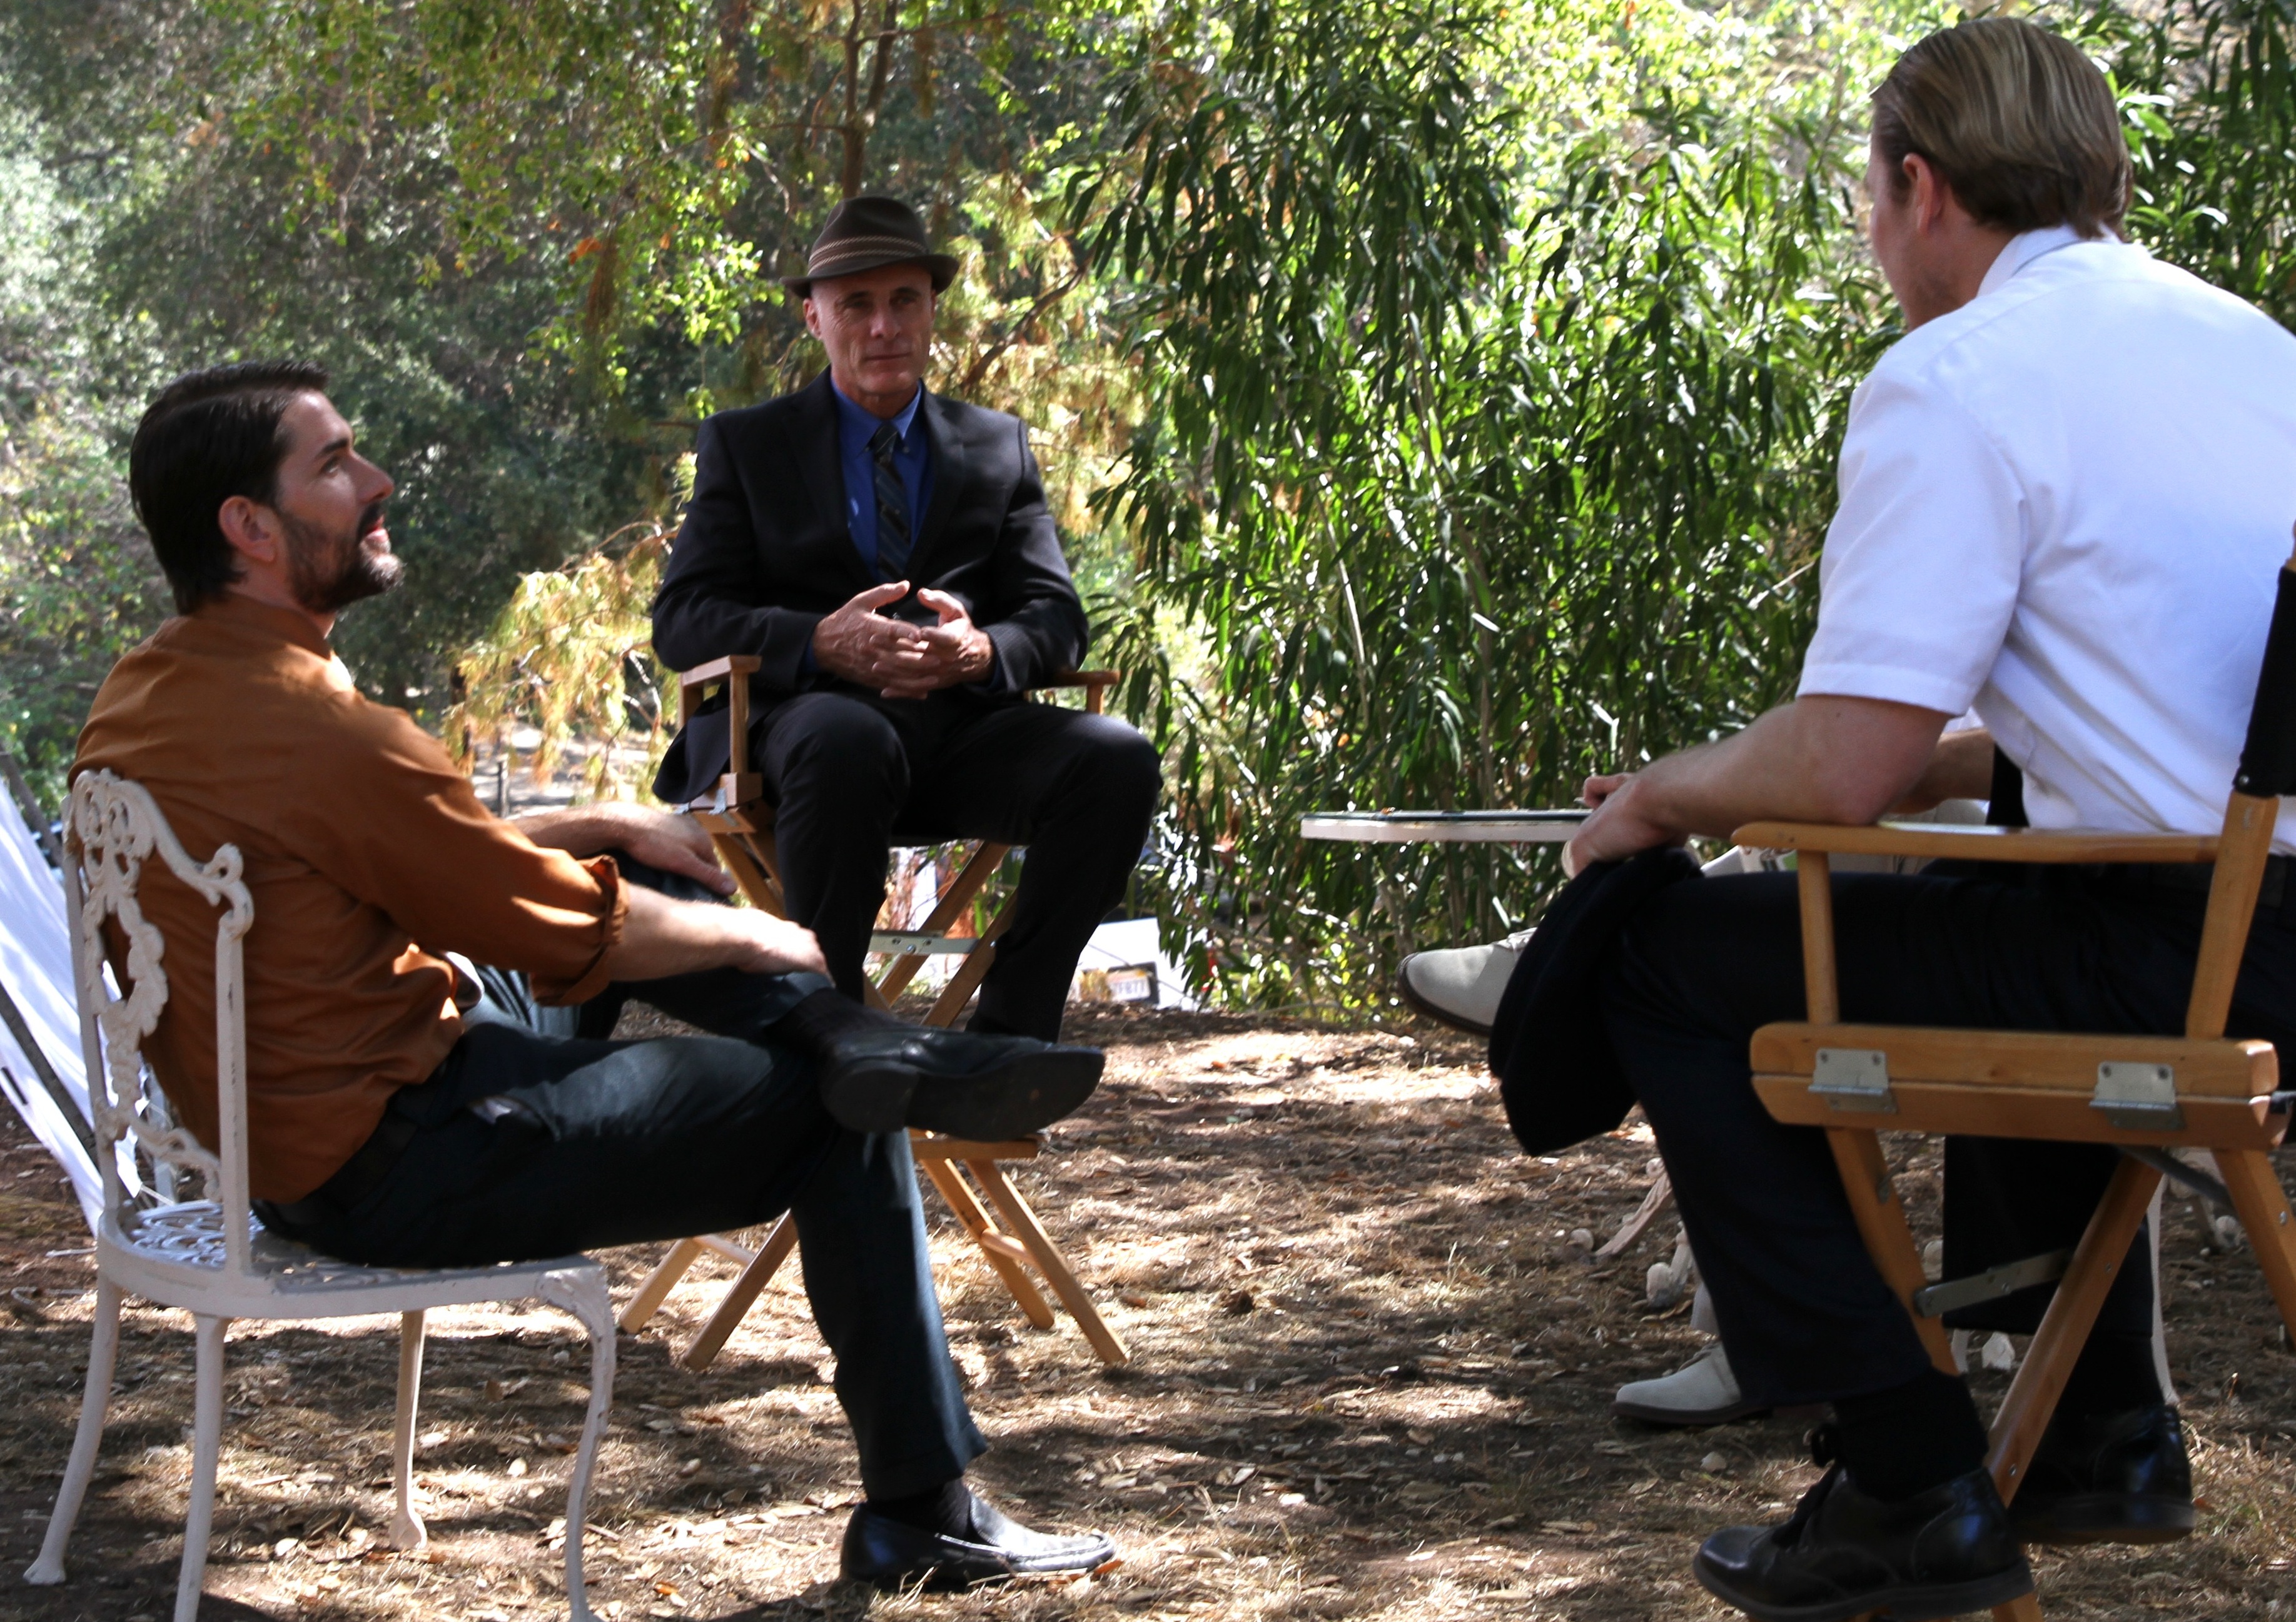 Ryan Harper Gray, Timothy V Murphy, and Justin Arnold on the set of No Way to Live